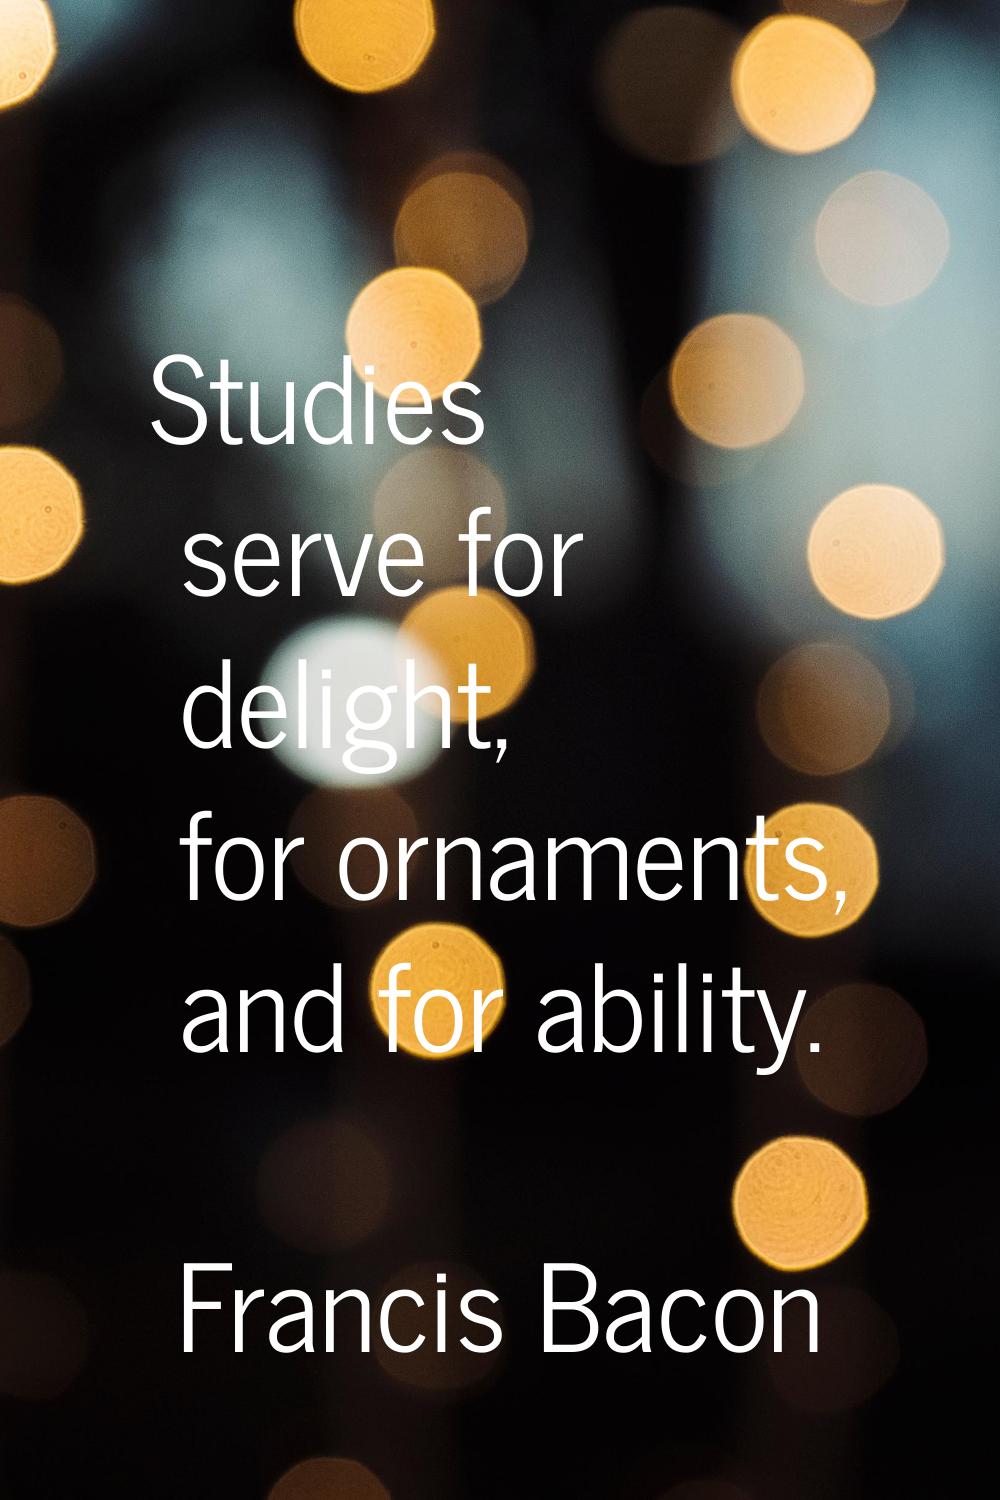 Studies serve for delight, for ornaments, and for ability.